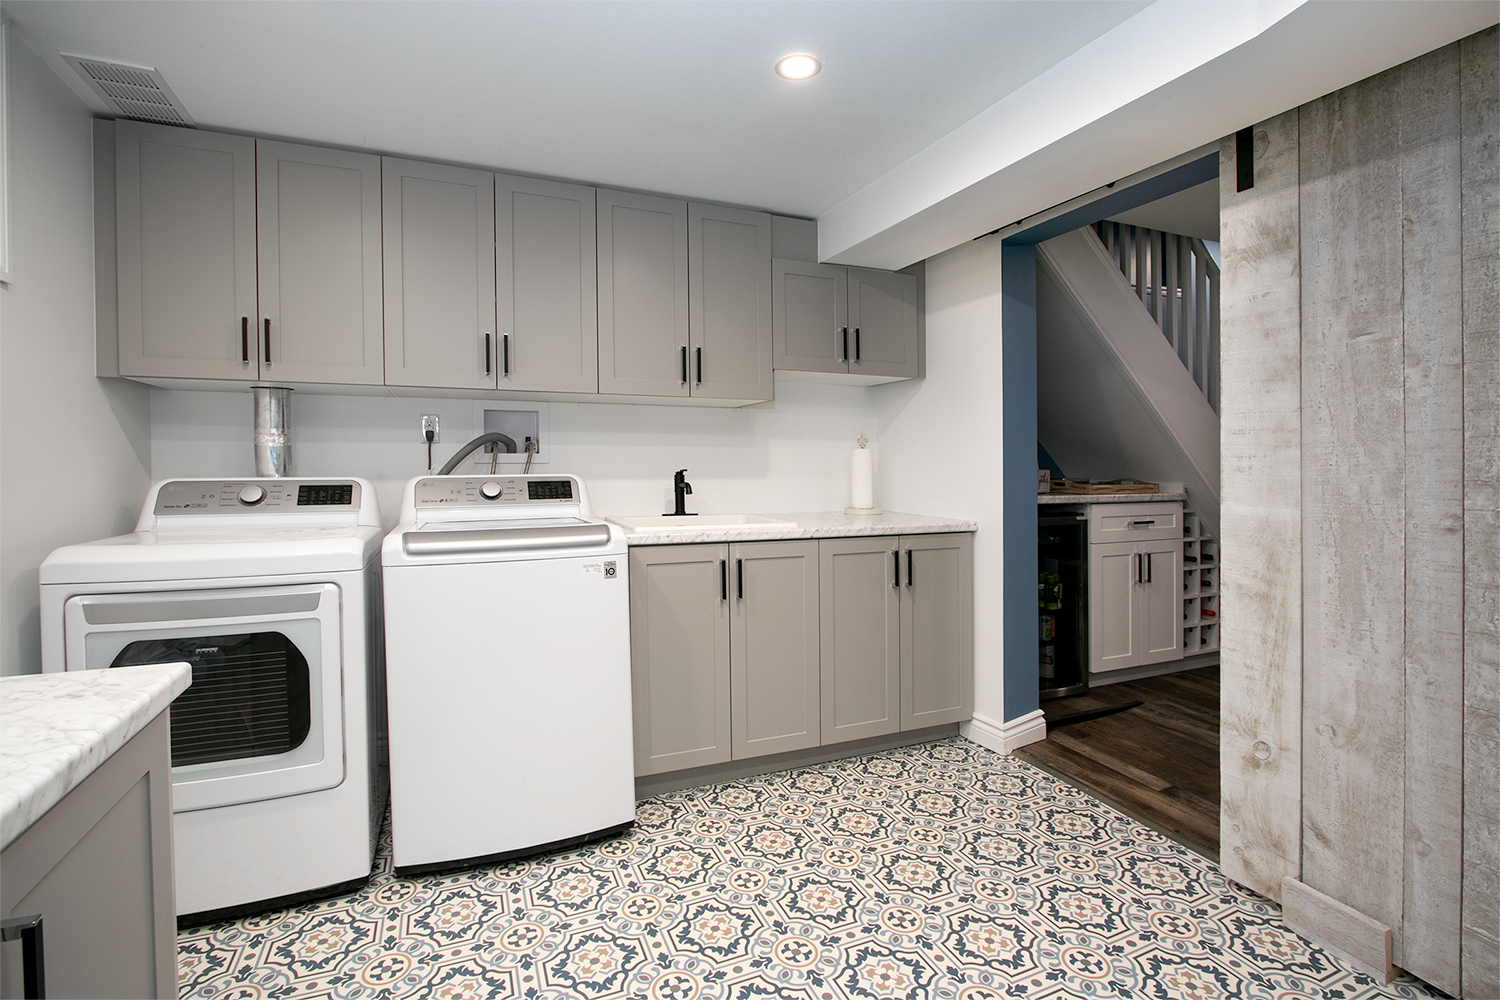 Laundry room countertop ideas: 8 materials and layouts to inspire